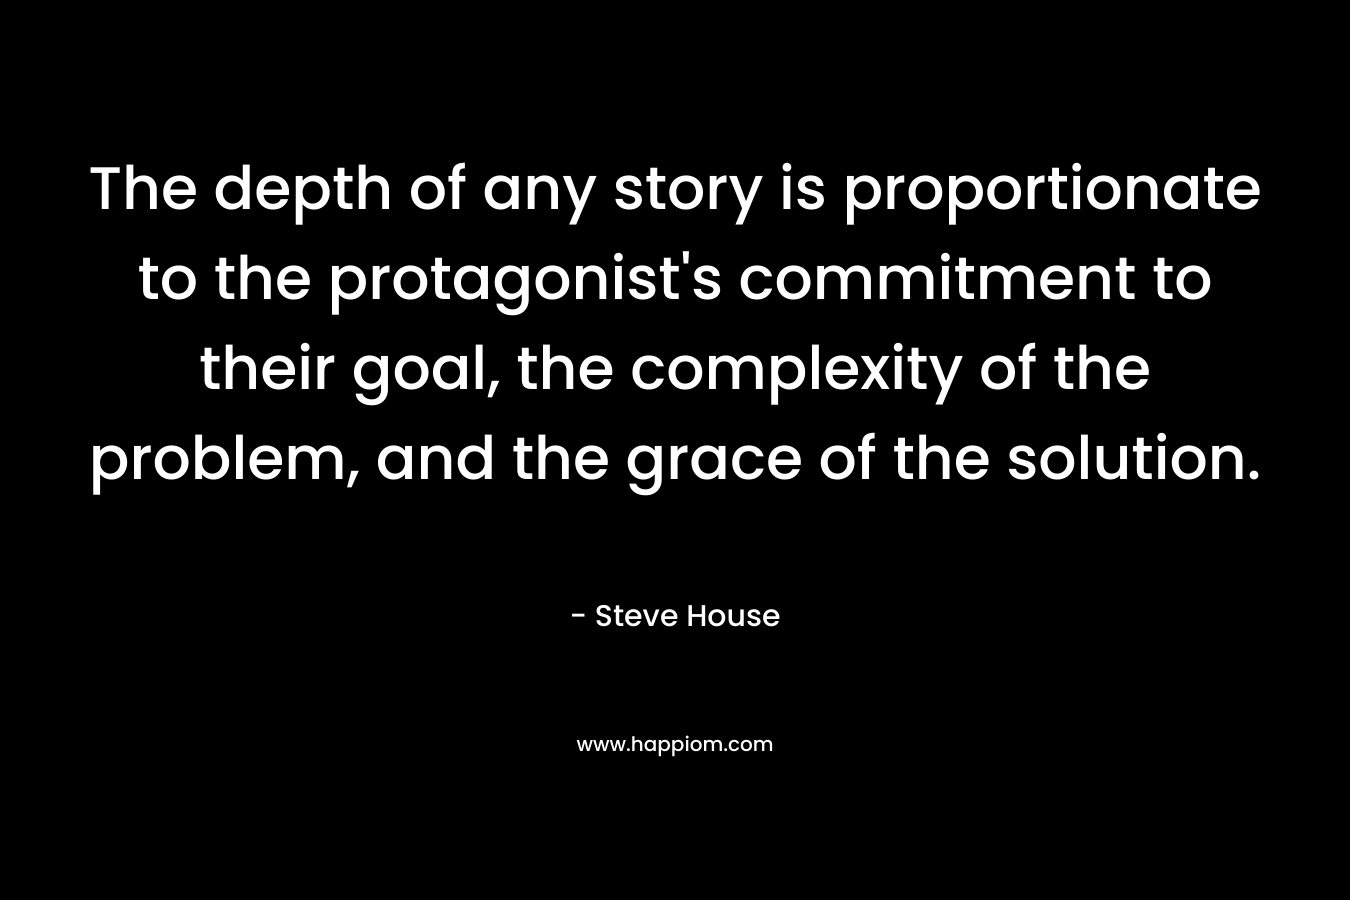 The depth of any story is proportionate to the protagonist’s commitment to their goal, the complexity of the problem, and the grace of the solution. – Steve House